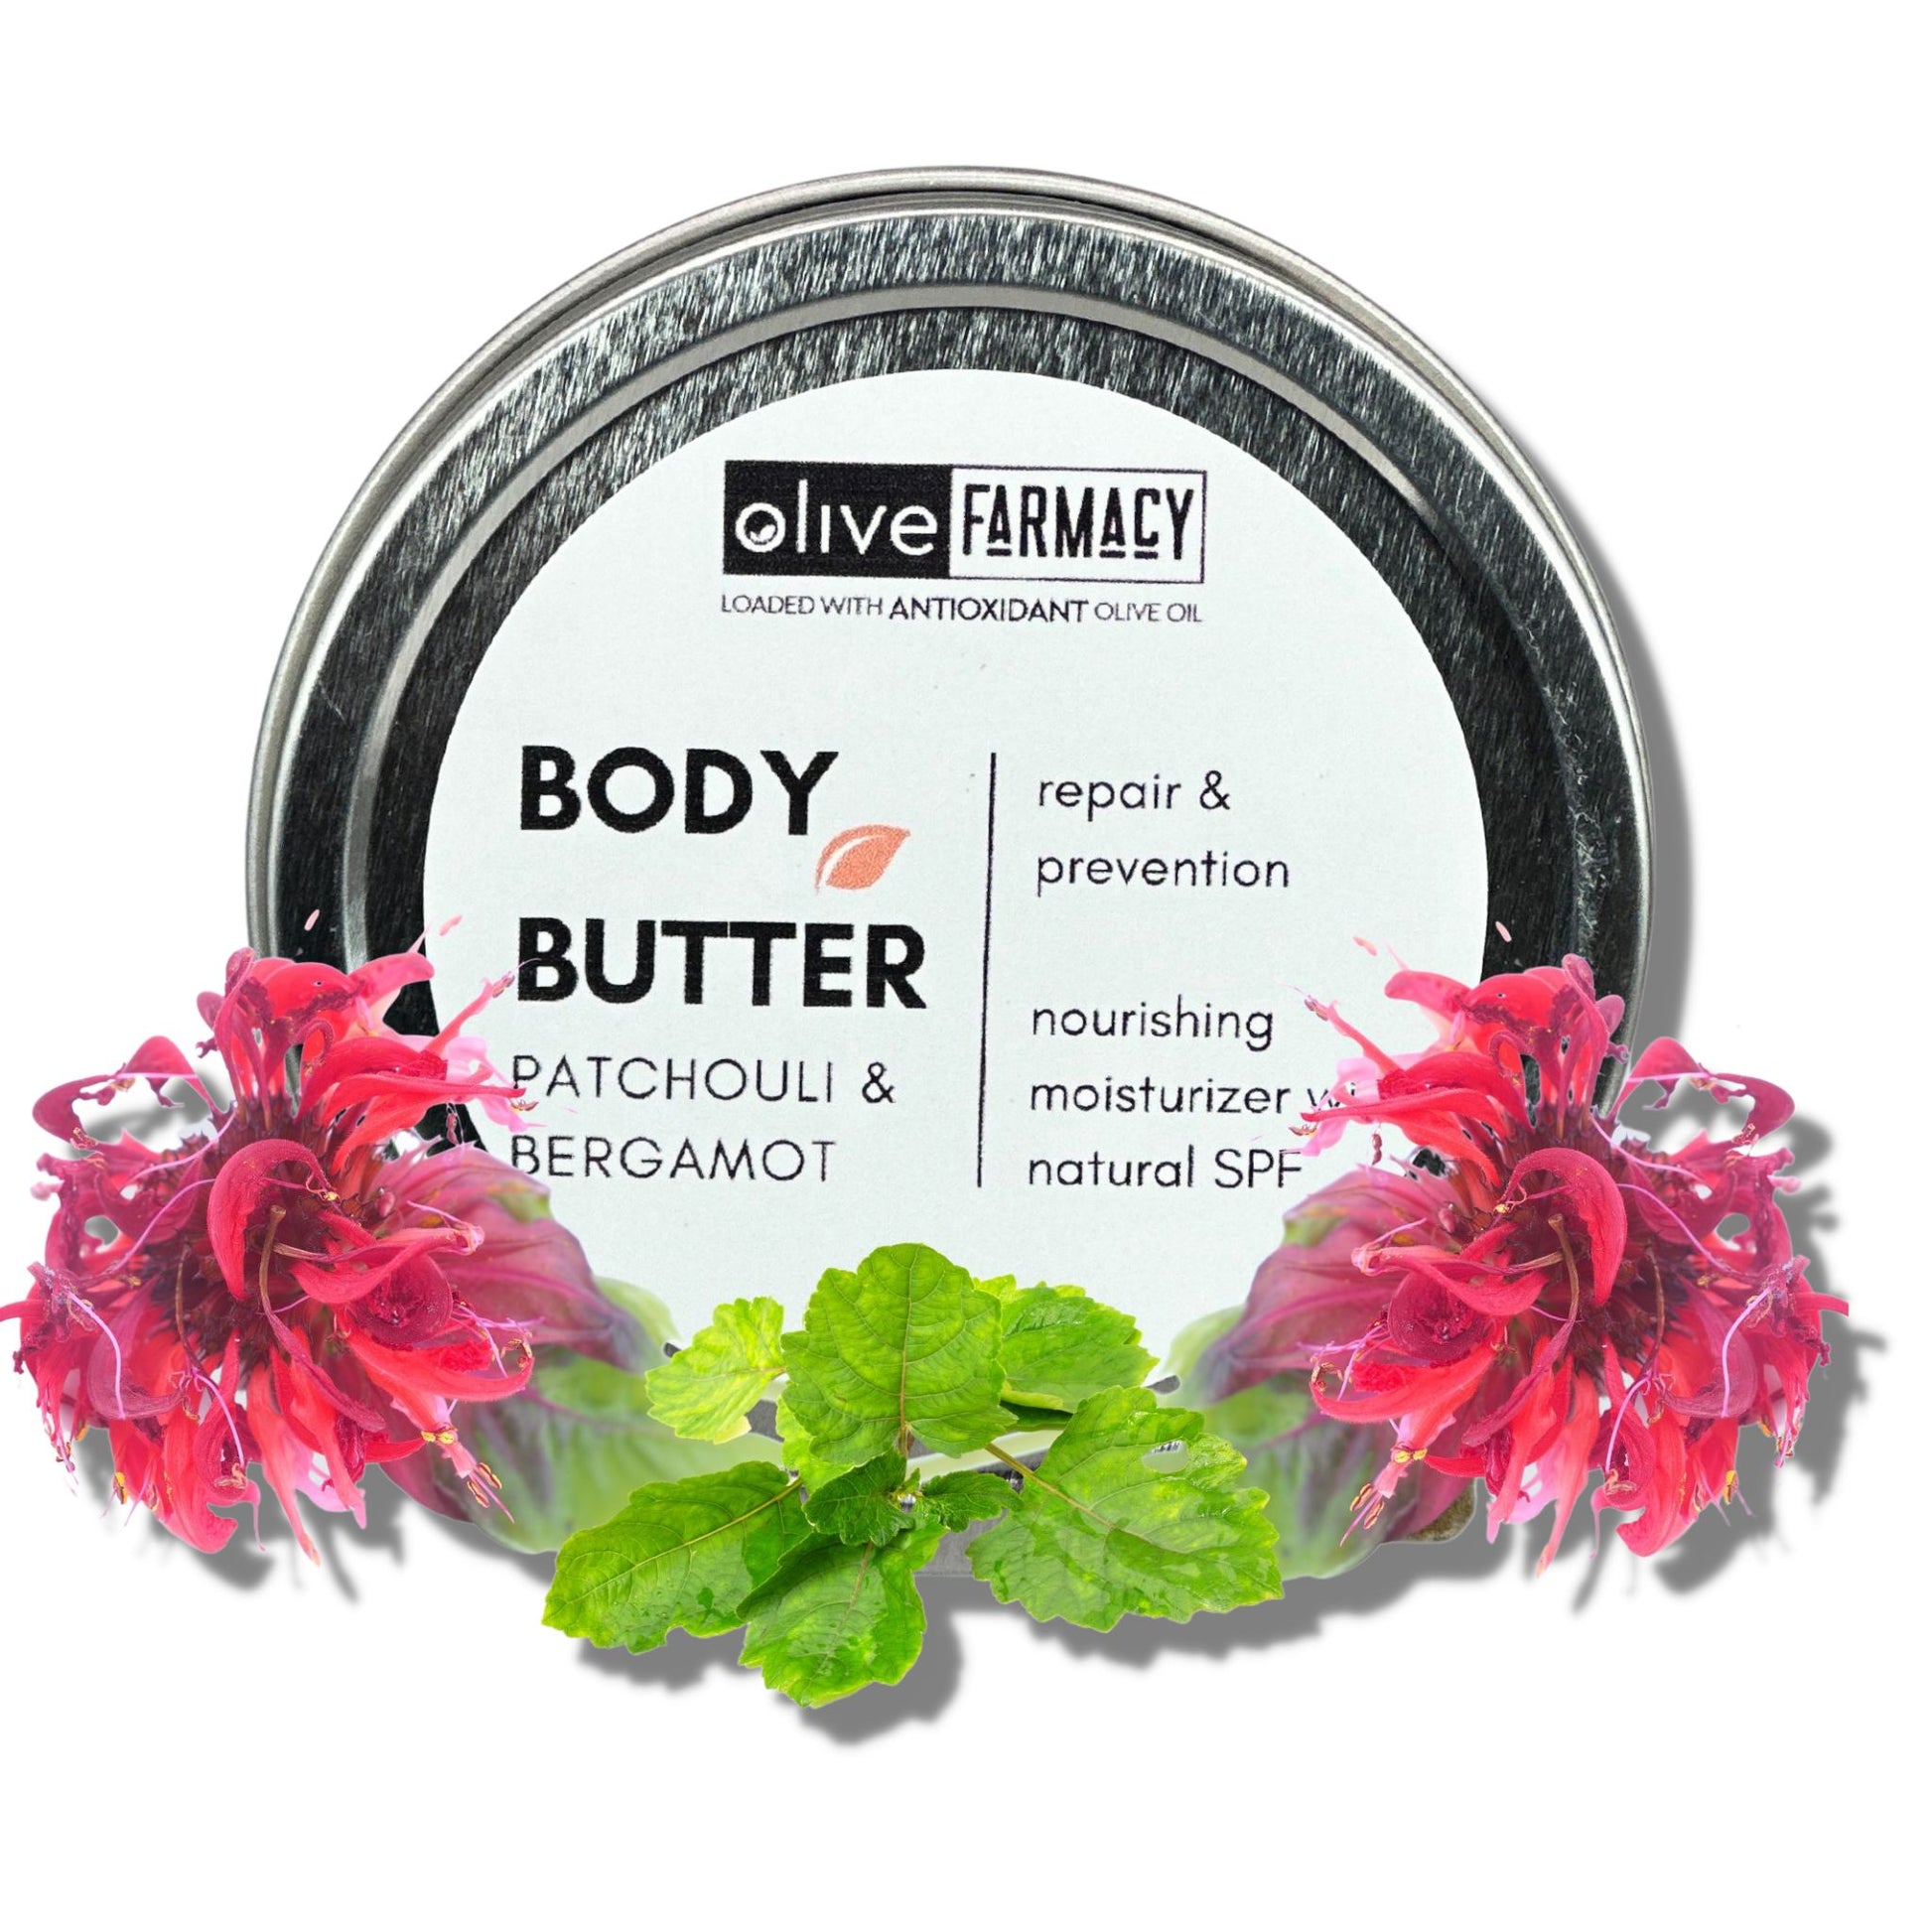 Patchouli & Bergamot Essentials oils blend together in this natural body butter made with olive oil, kokum and shea butter